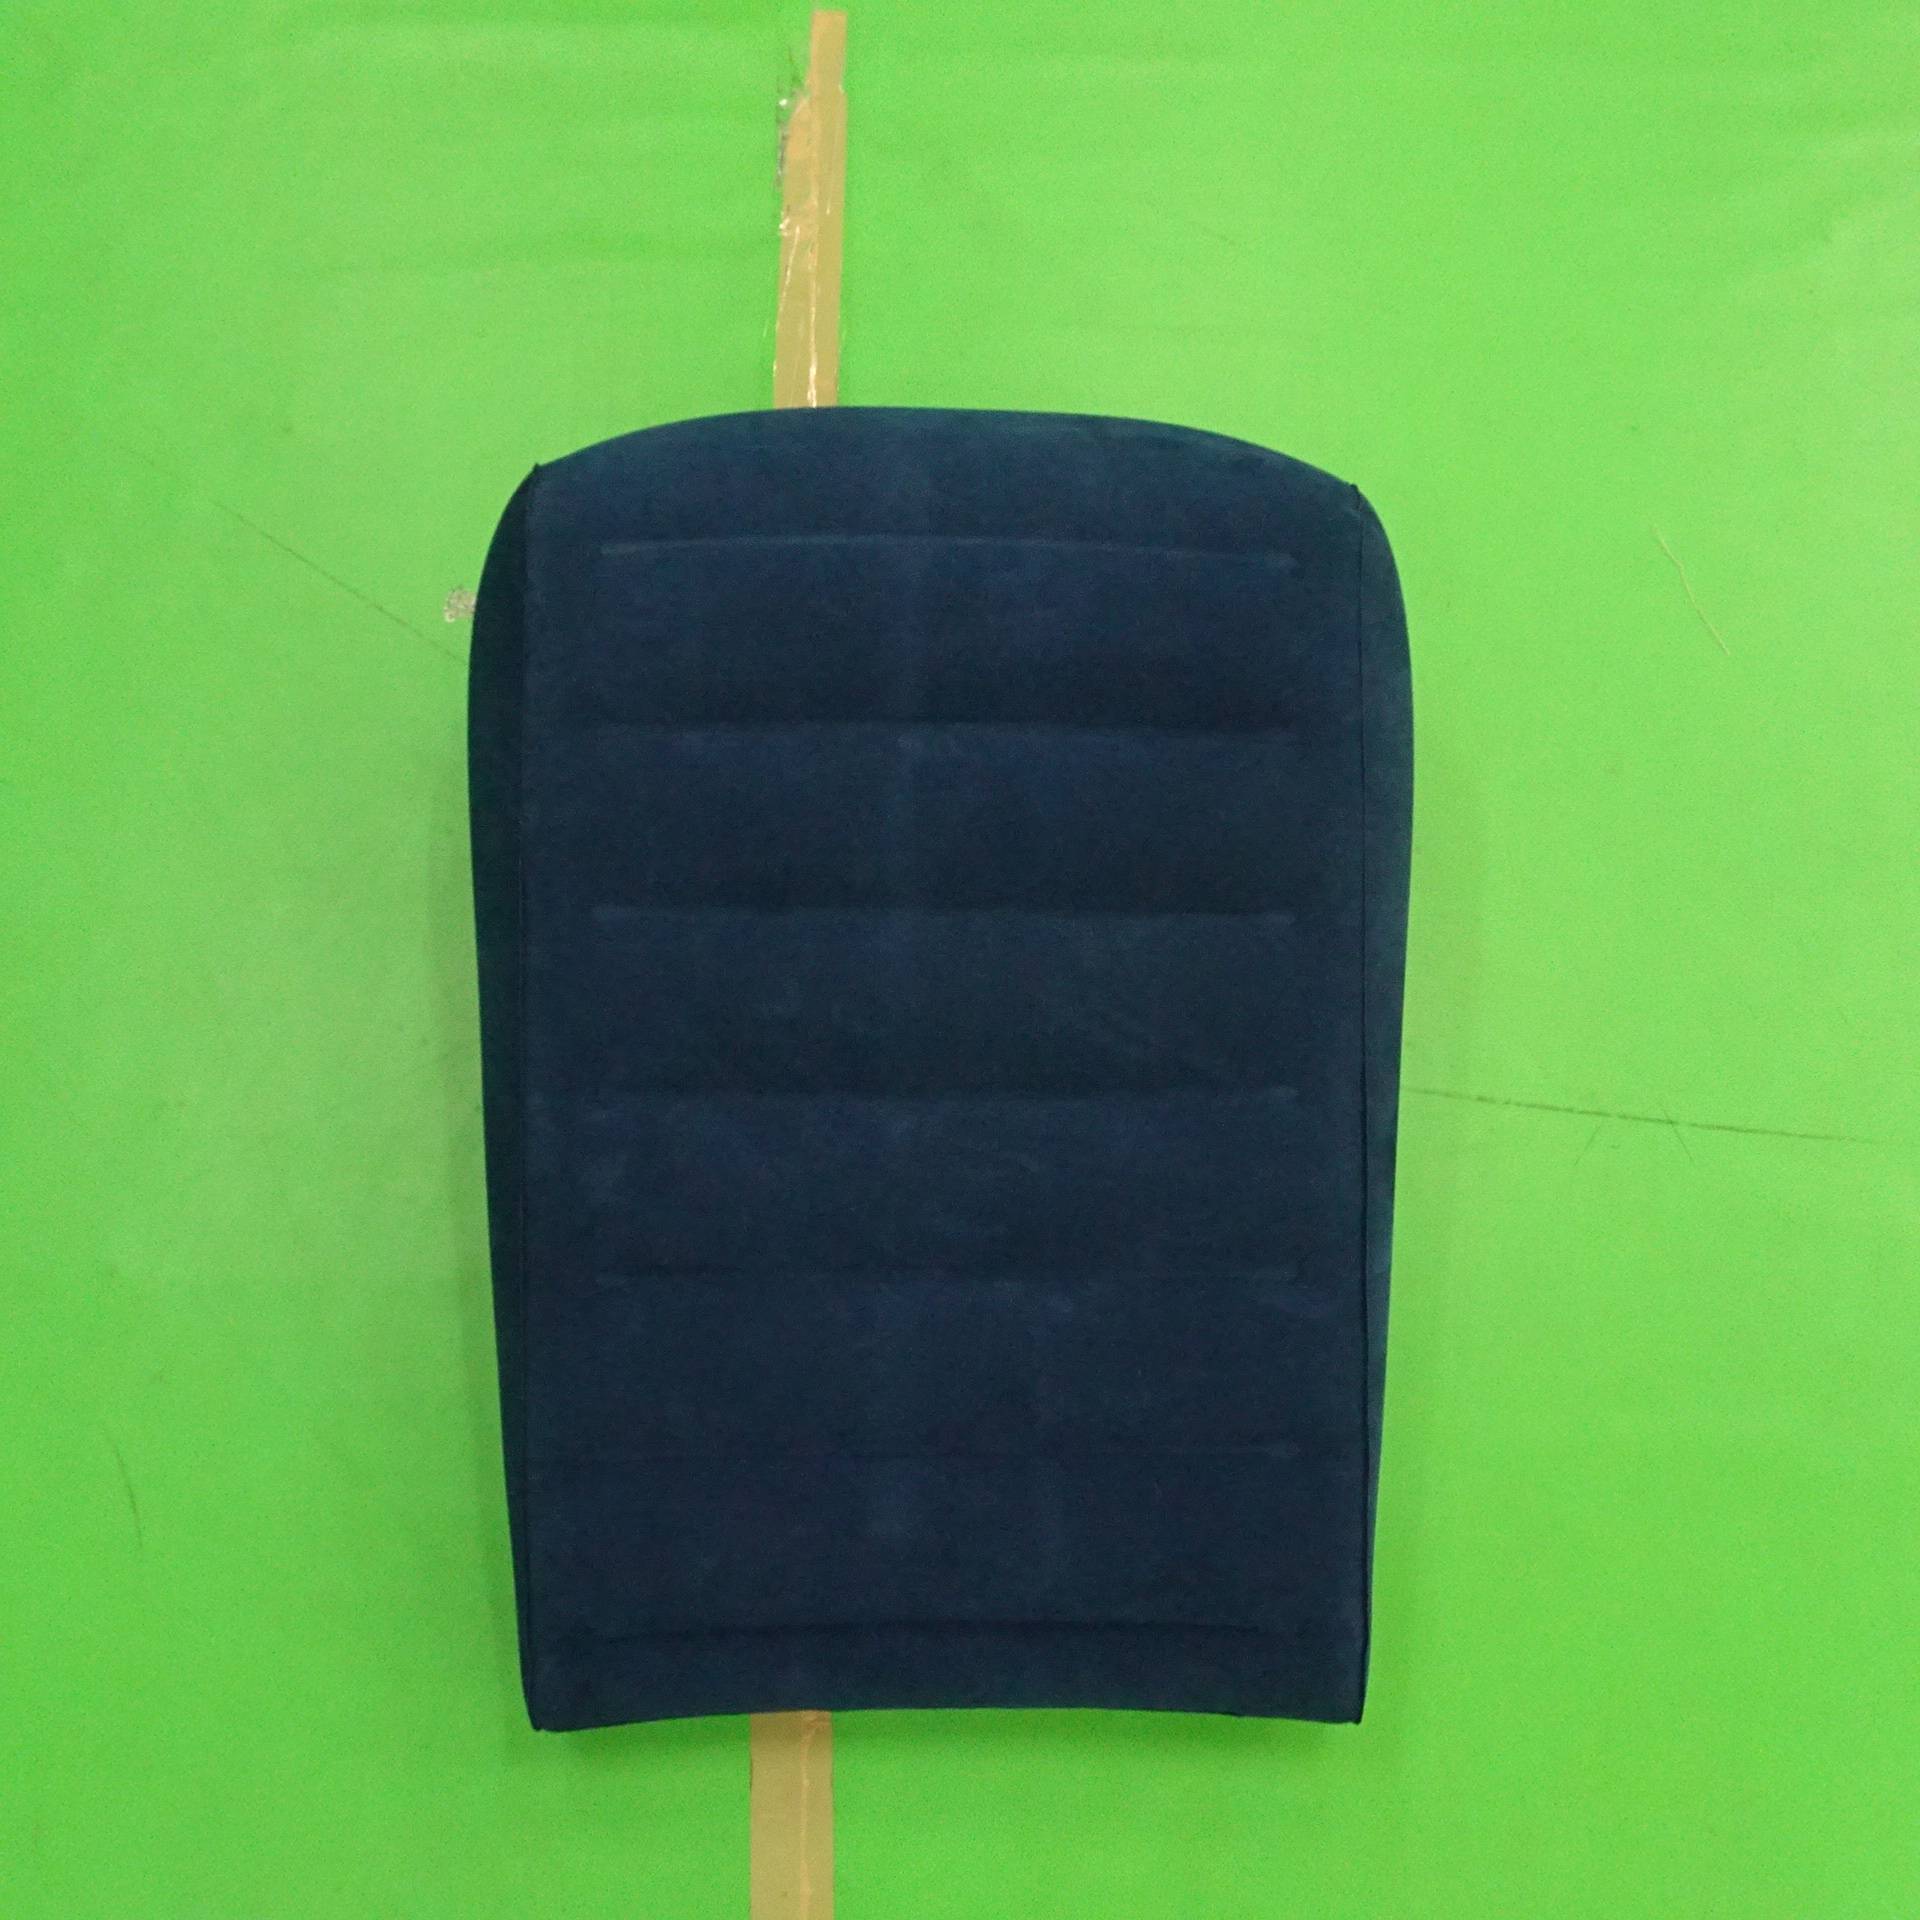 Customised Inflatable Back Rest Wedge Shape Air Cushion  Sexy On Bed Or Traveling